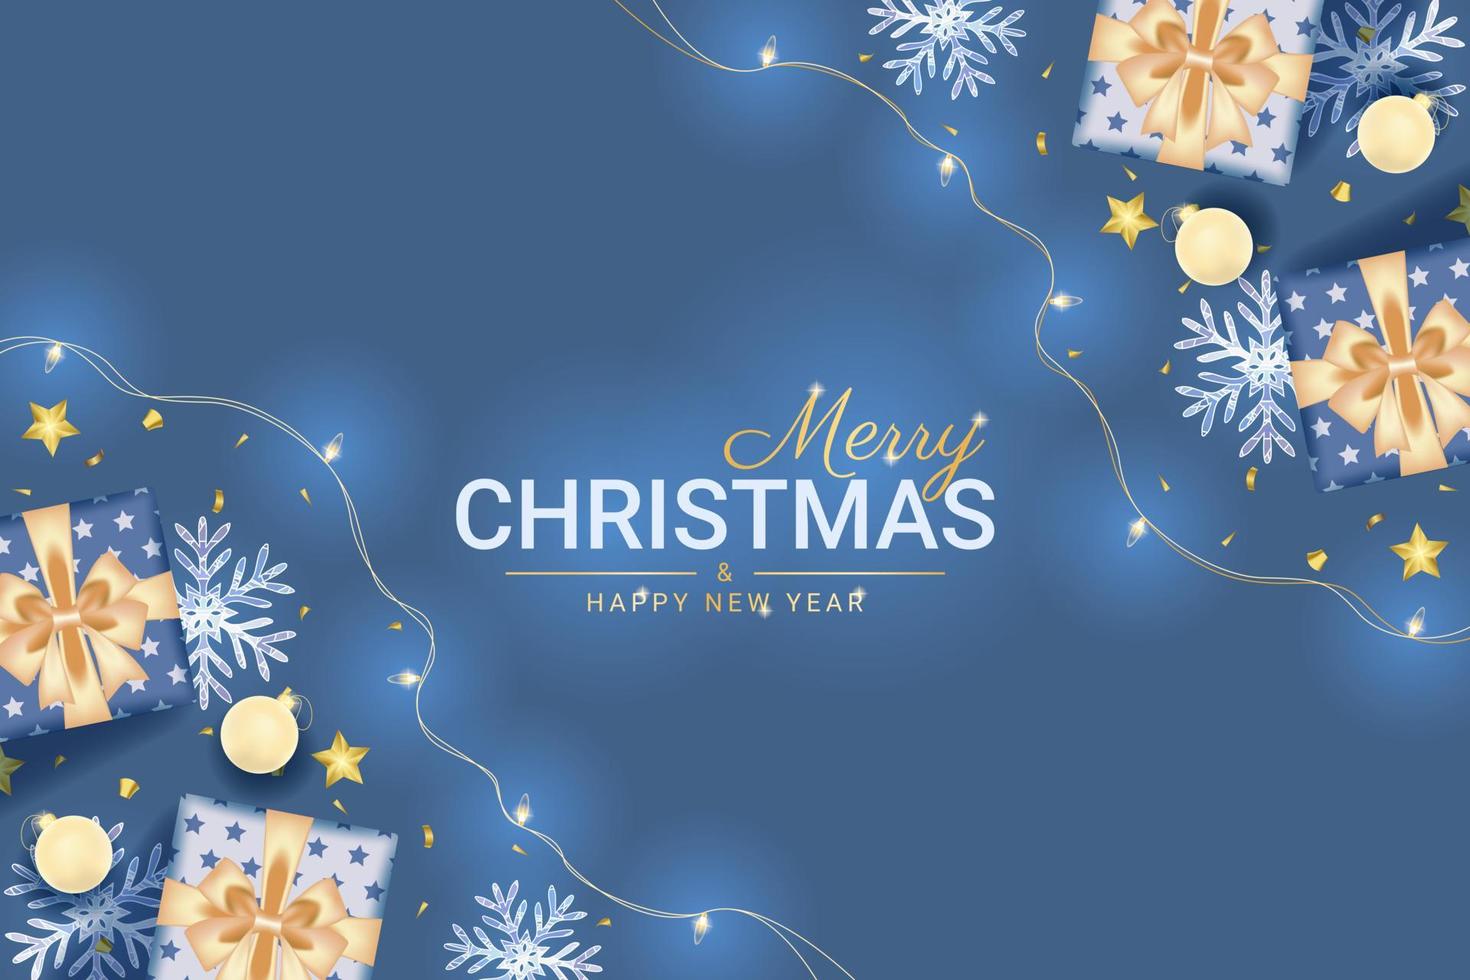 merry christmas and happy new year greeting card with realistic blue decoration vector